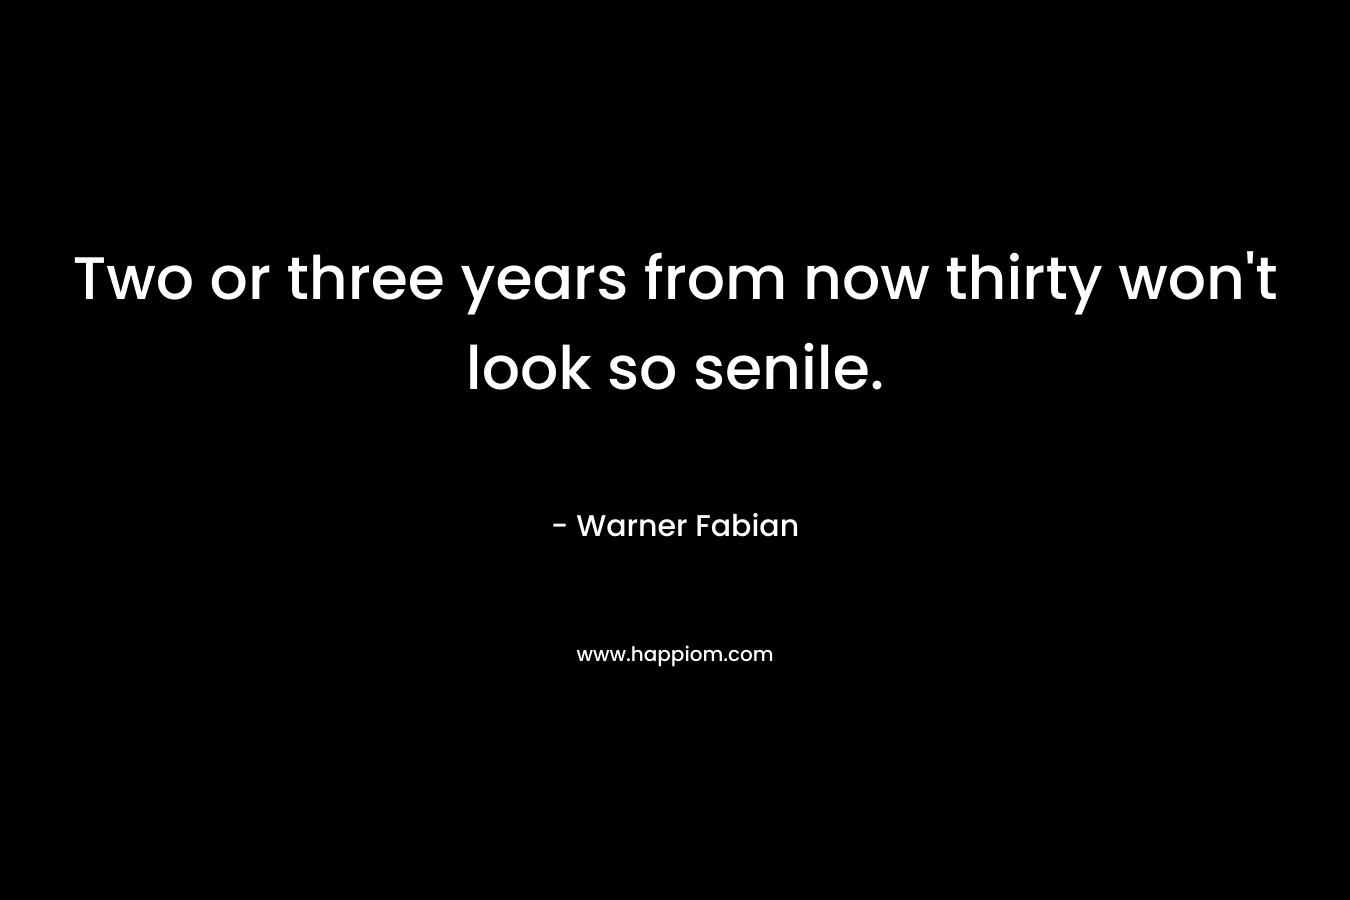 Two or three years from now thirty won’t look so senile. – Warner Fabian